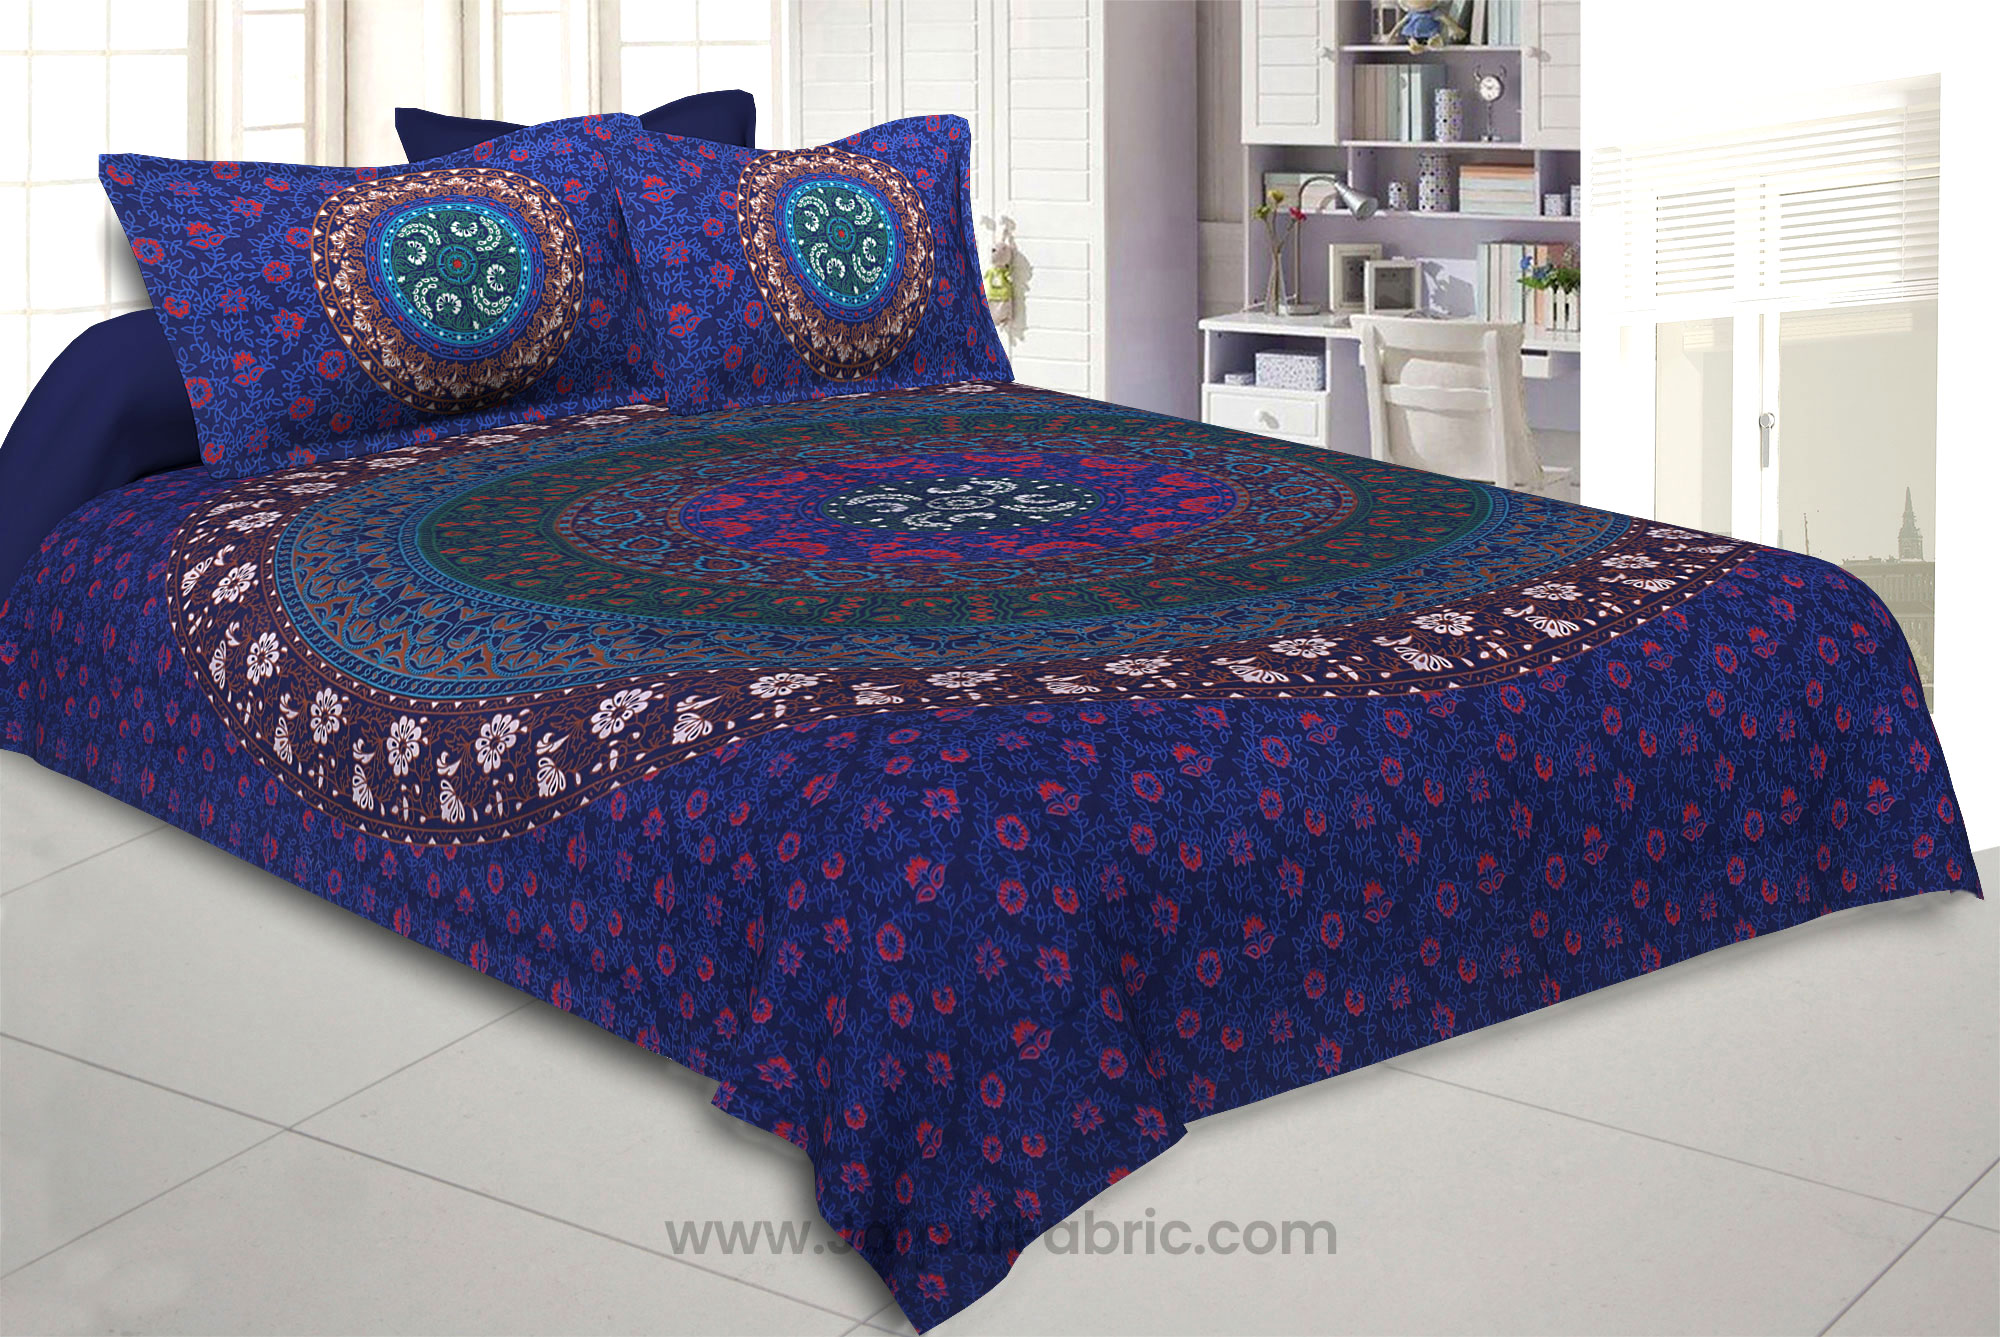 Blue Double Bedsheet Indian Mandala Tapestry Hippy Tapestries Hippie Beach Throw